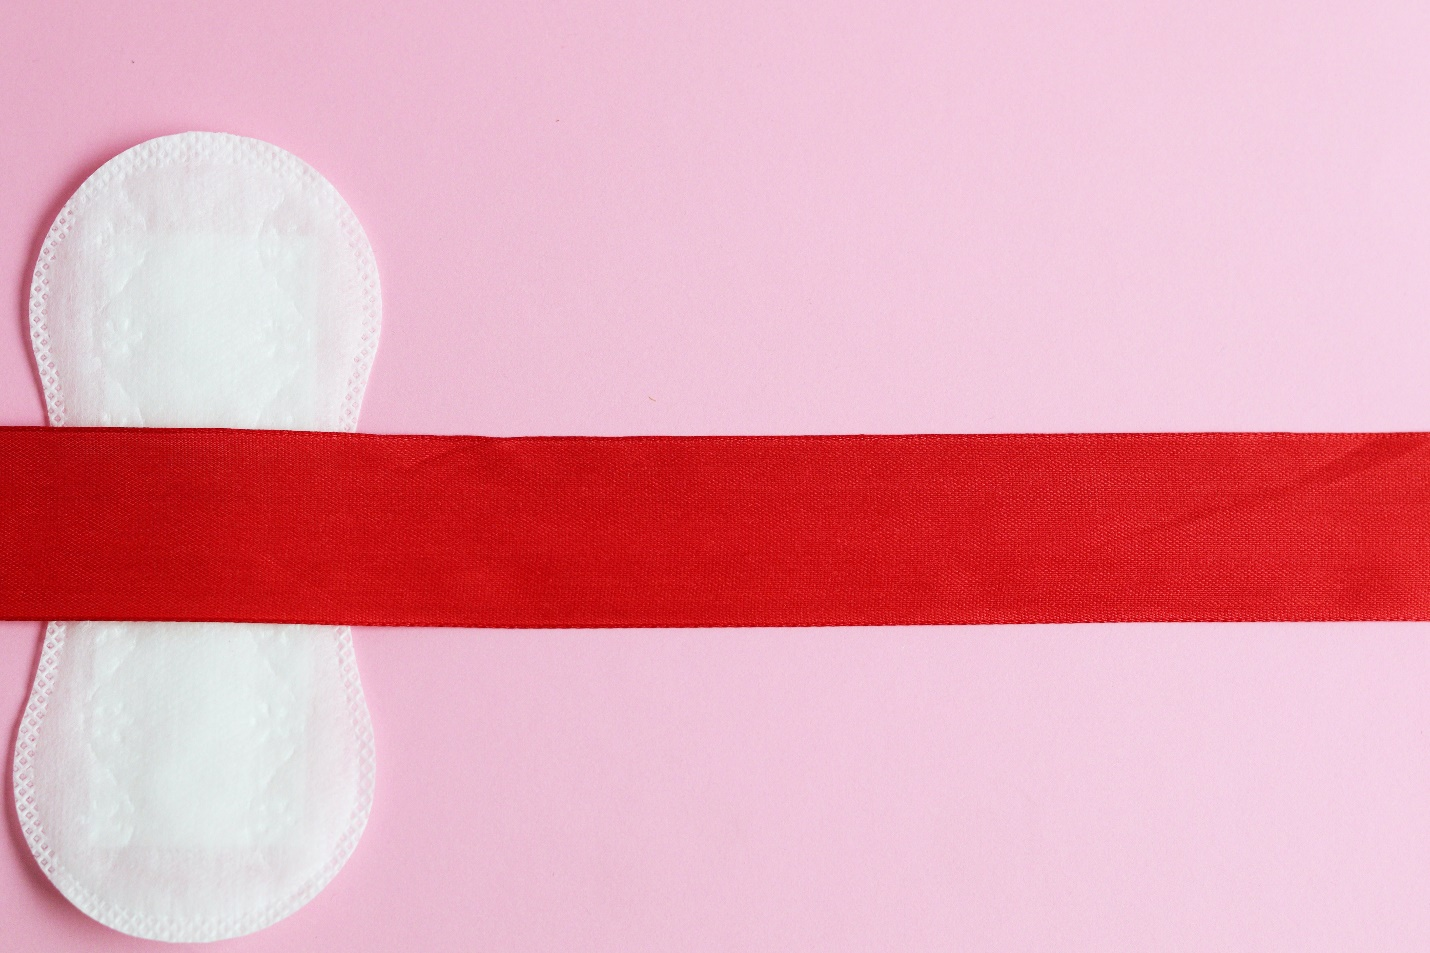 A sanitary napkin lying open on a pink surface